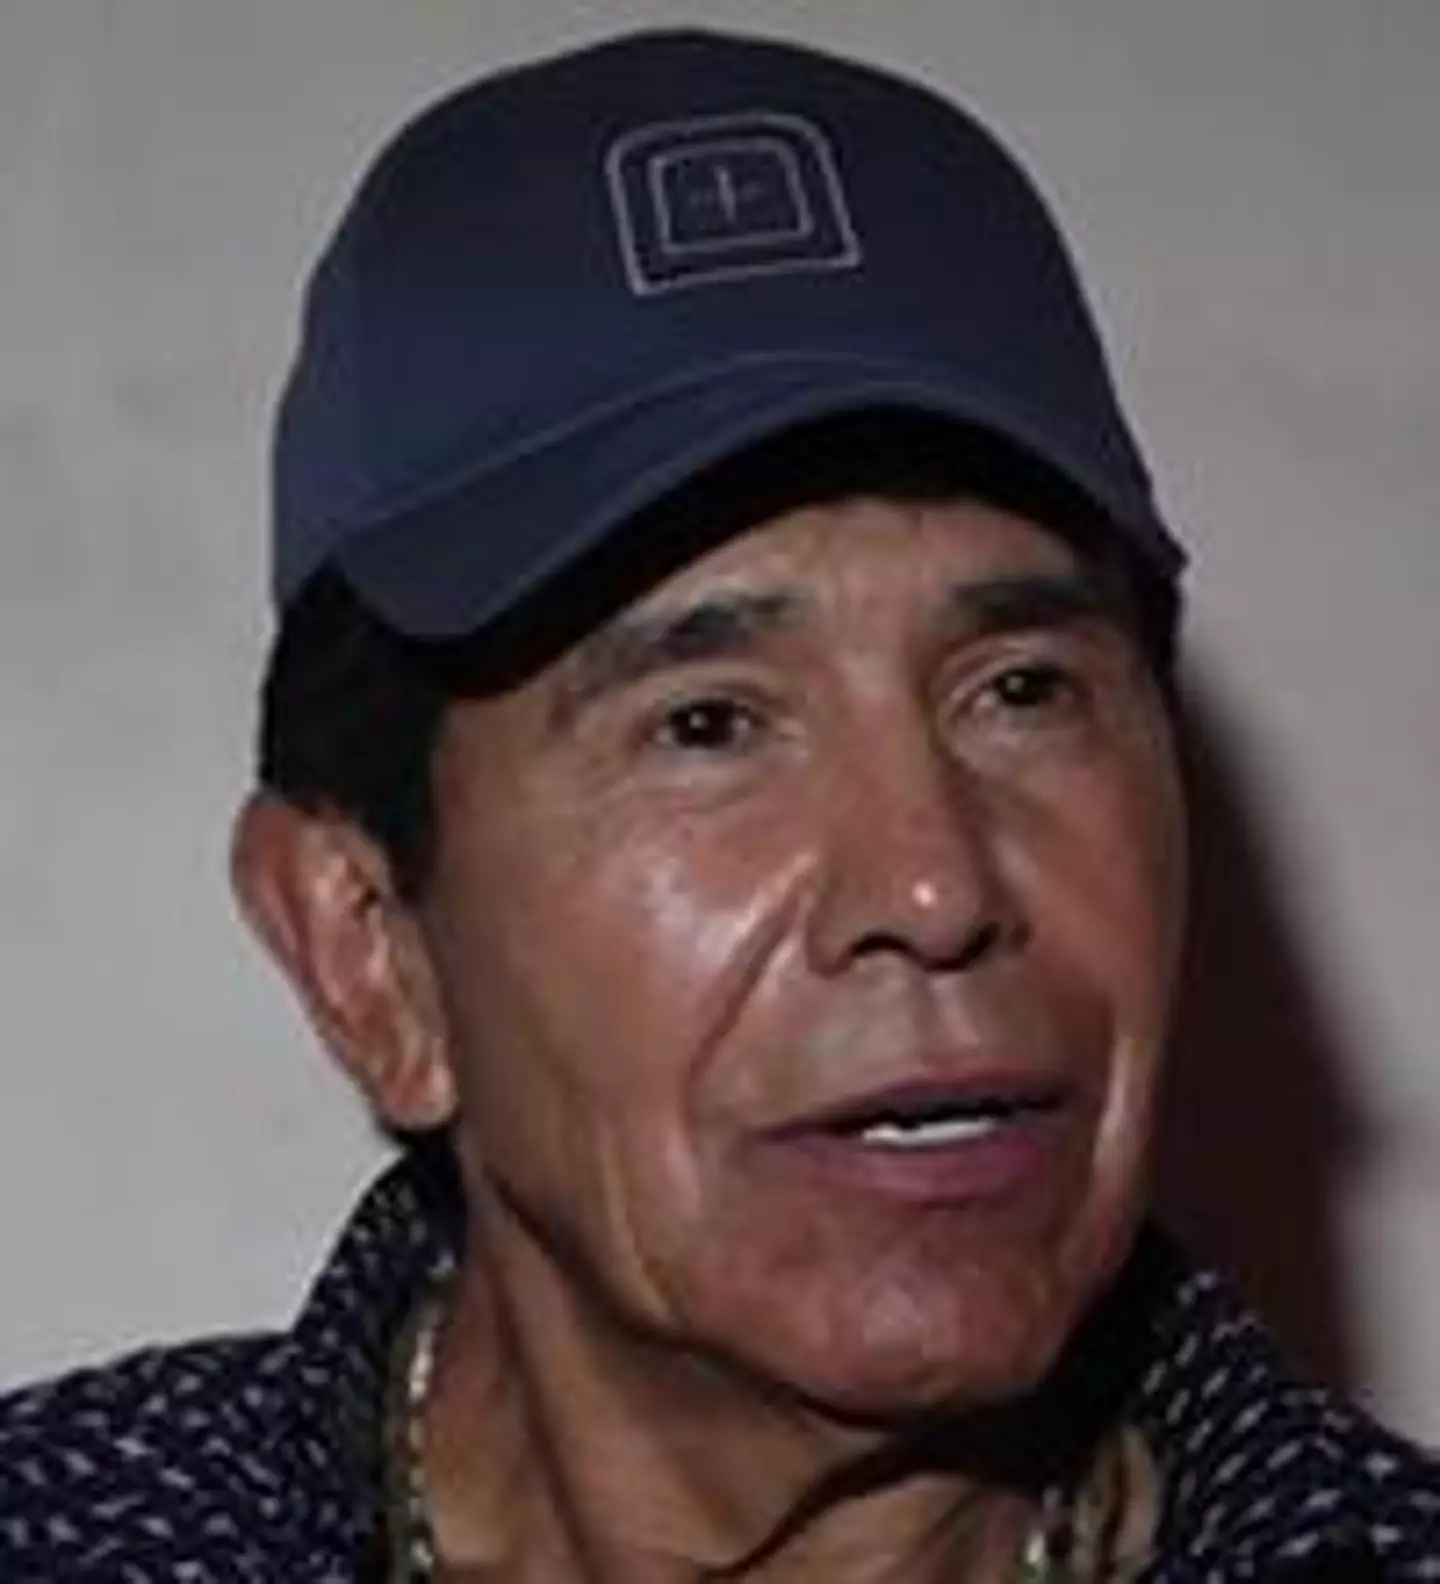 Rafael Caro Quintero started a new cartel after he was released from prison in 2013, according to a new report.